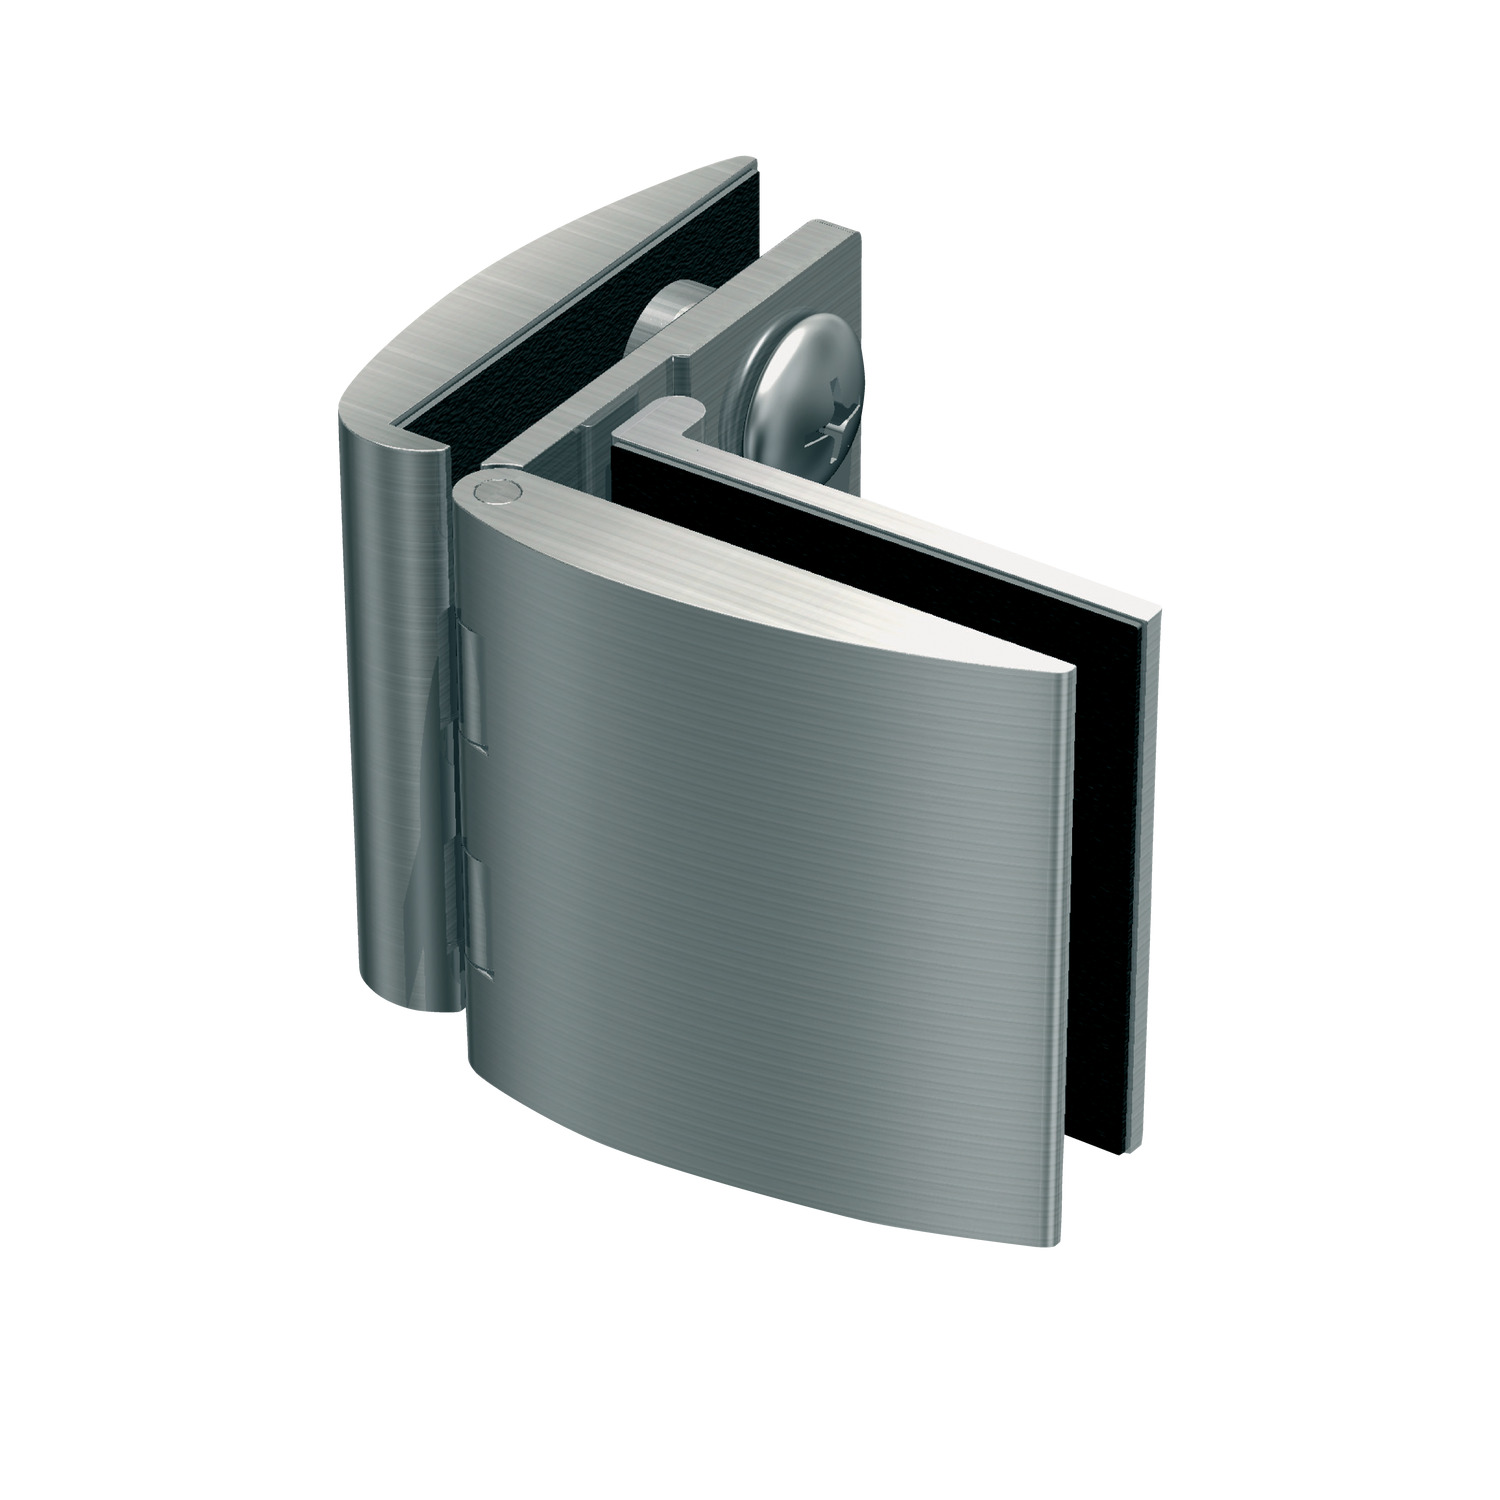 Glass Door Hinges - Glass to Glass Type Available in brass with nickel, chrome or gold finish. Spacers can be used to suit different door thicknesses, with none needed for a maximum thickness of 8mm. Suitable for glass-glass contact.